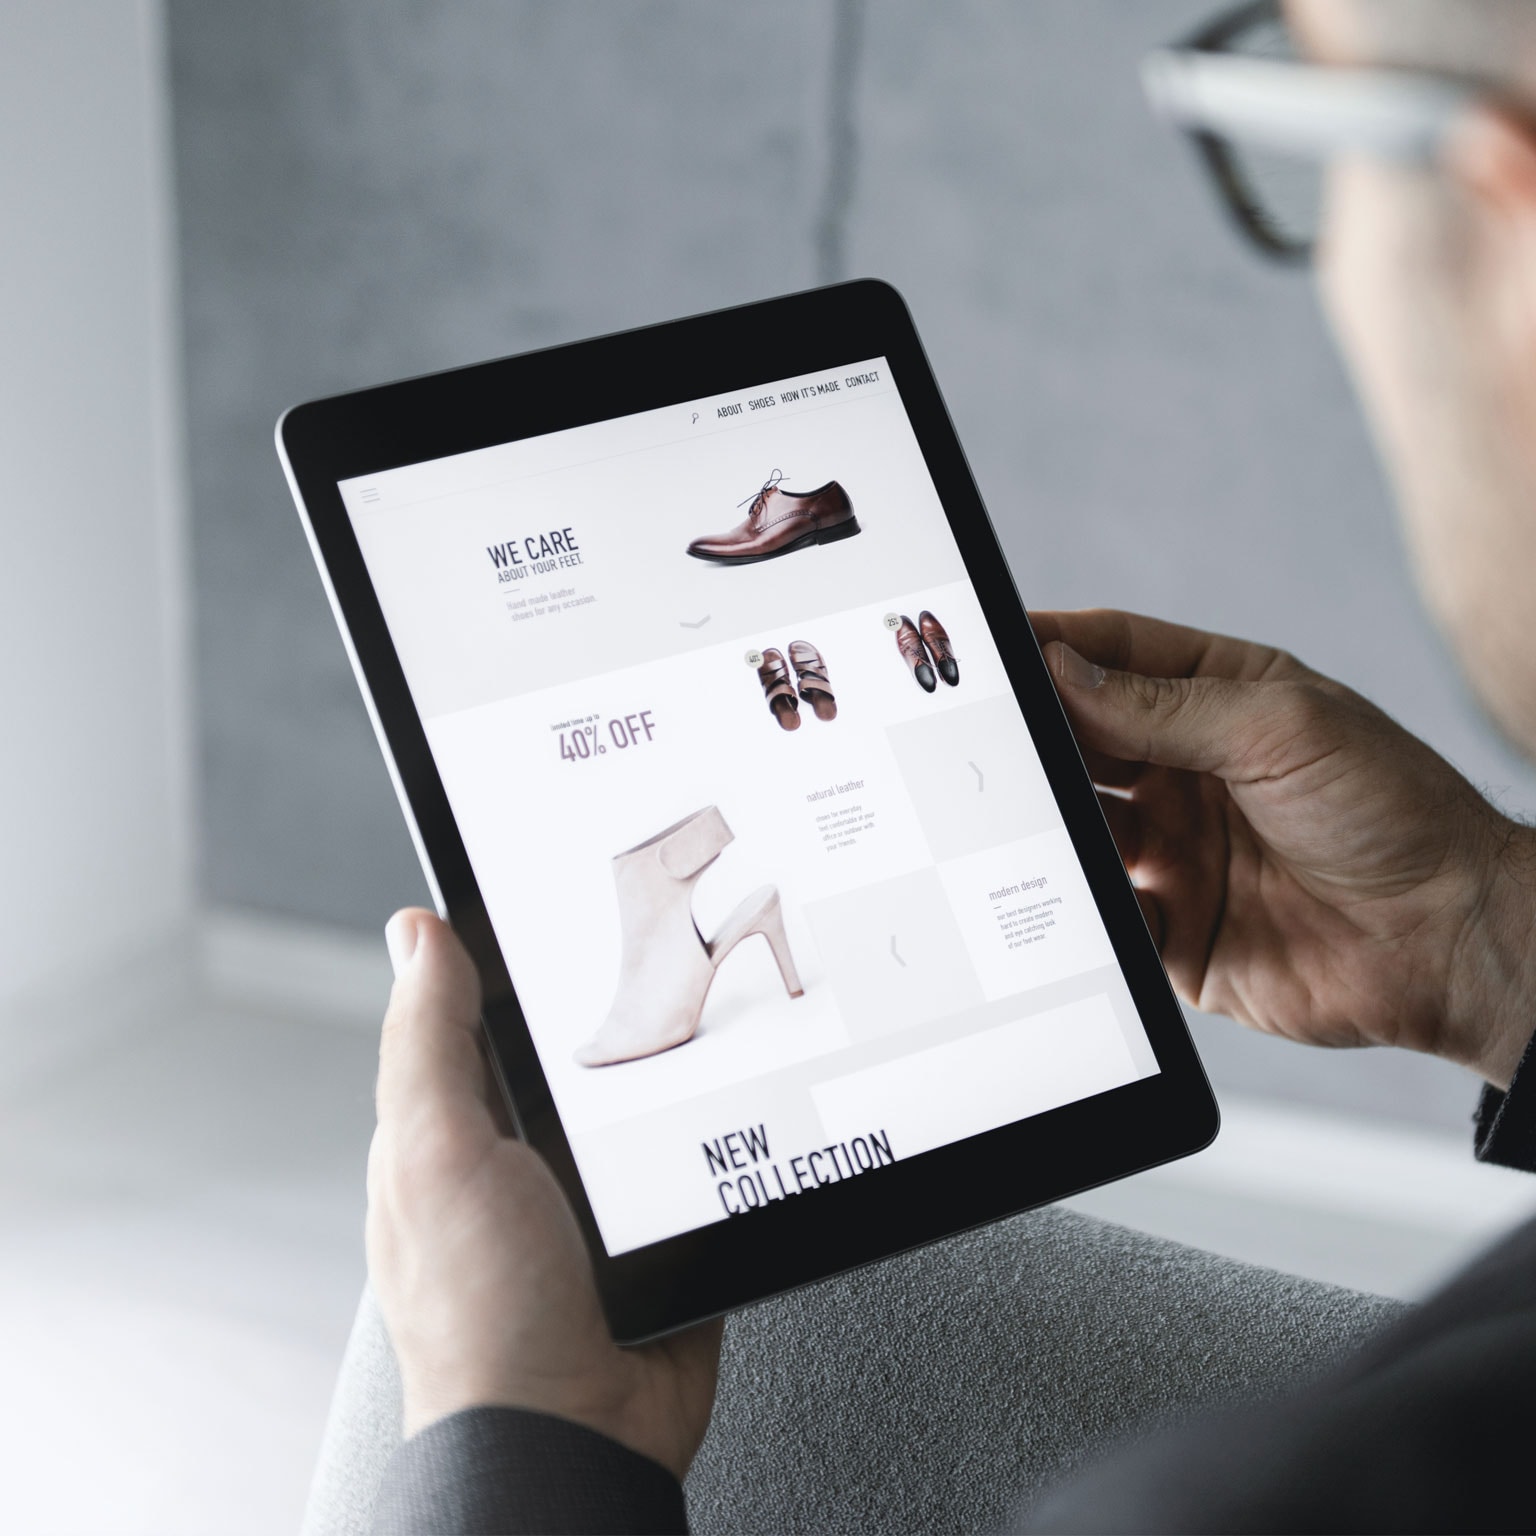 The fashion industry's digital transformation: Now or never | McKinsey